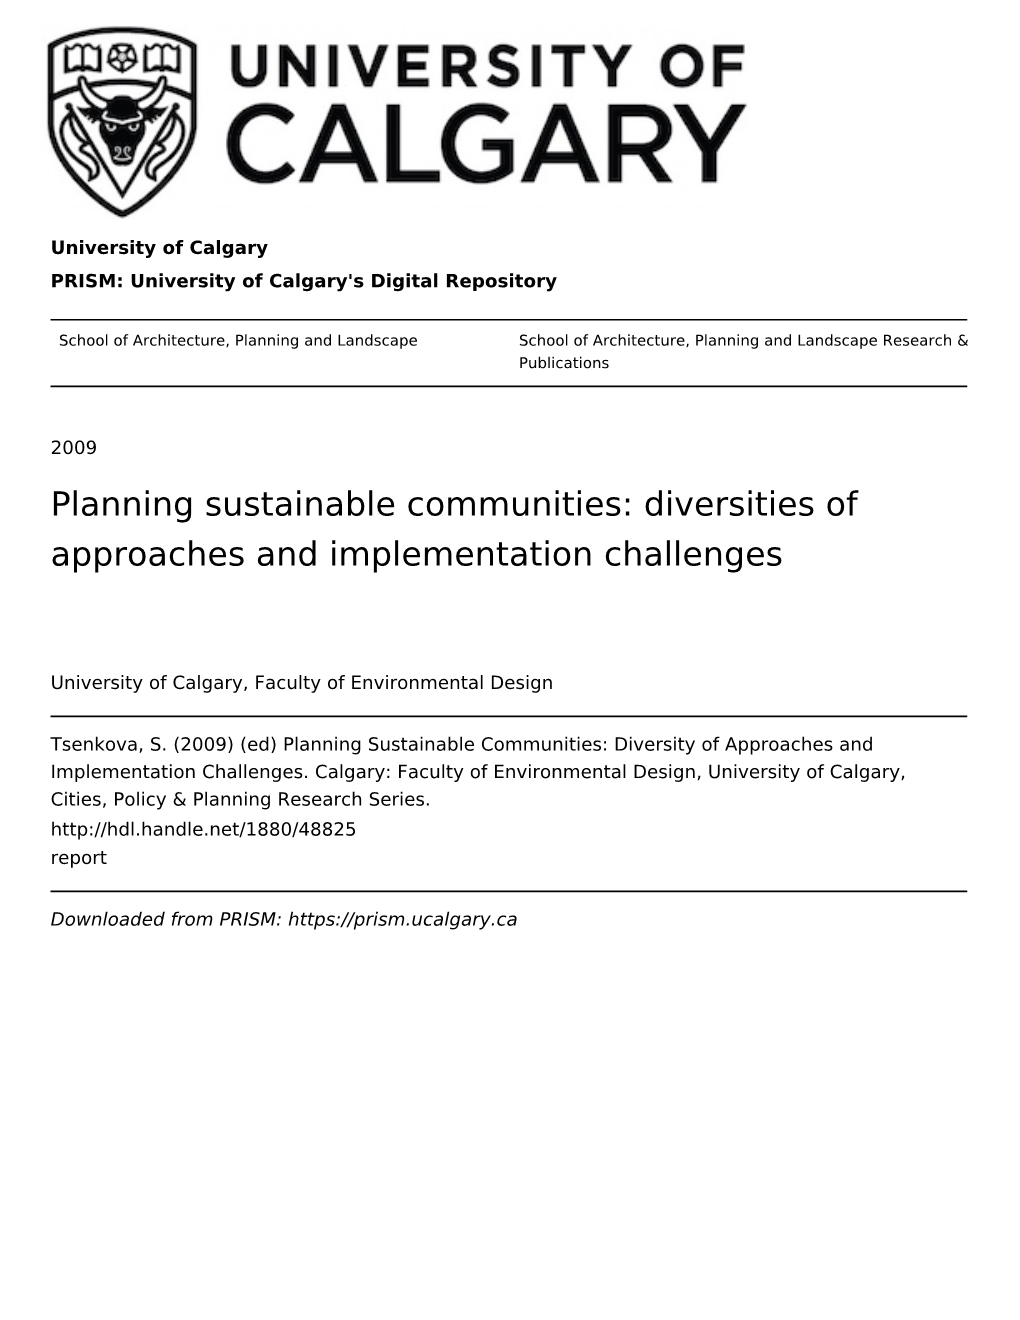 Planning Sustainable Communities: Diversities of Approaches and Implementation Challenges